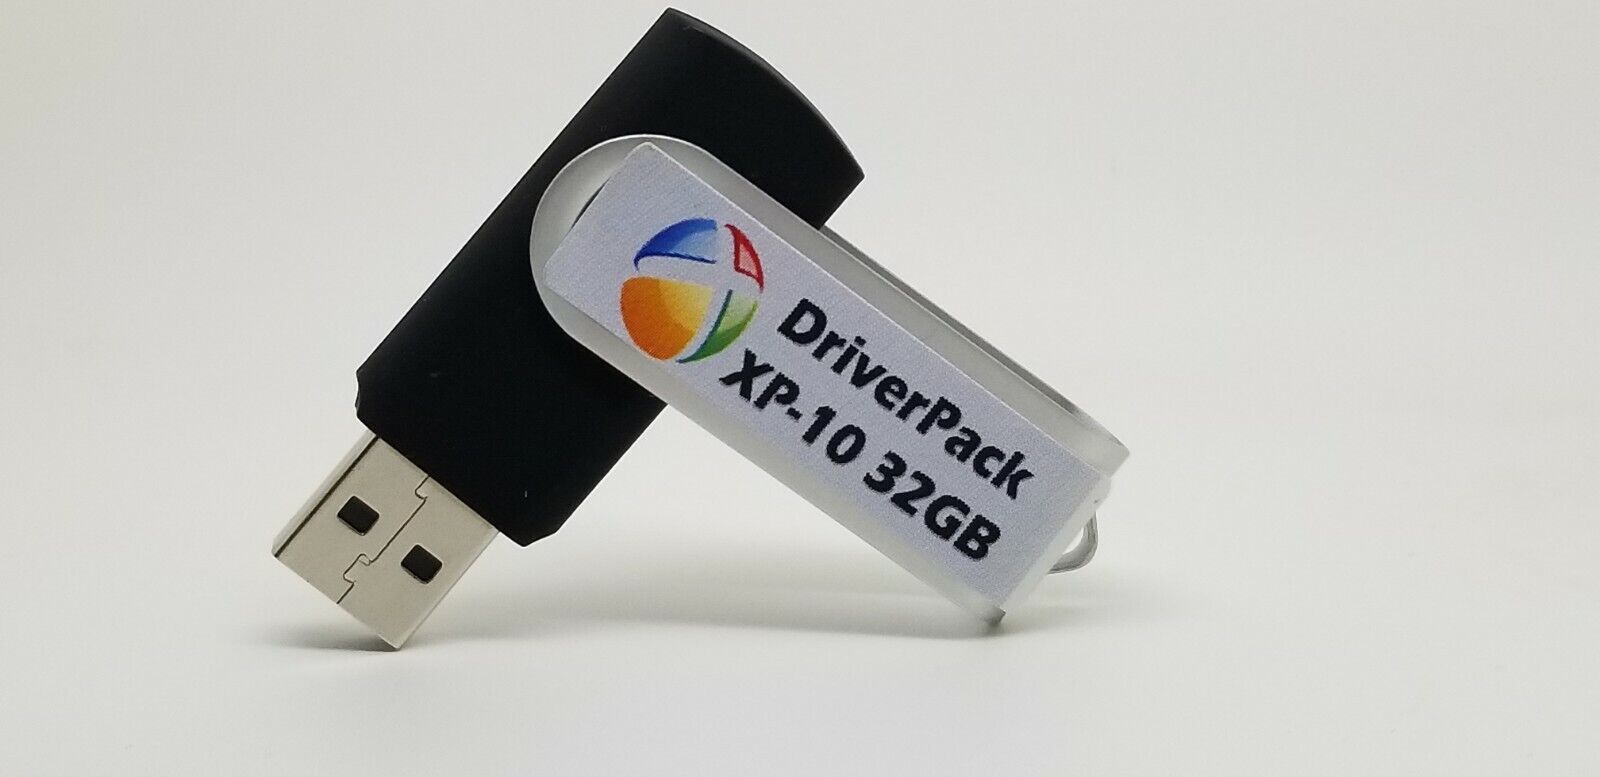 Drivers  All in One Pack For PC - Windows XP to Win 10 on USB Flash Drive 32GB